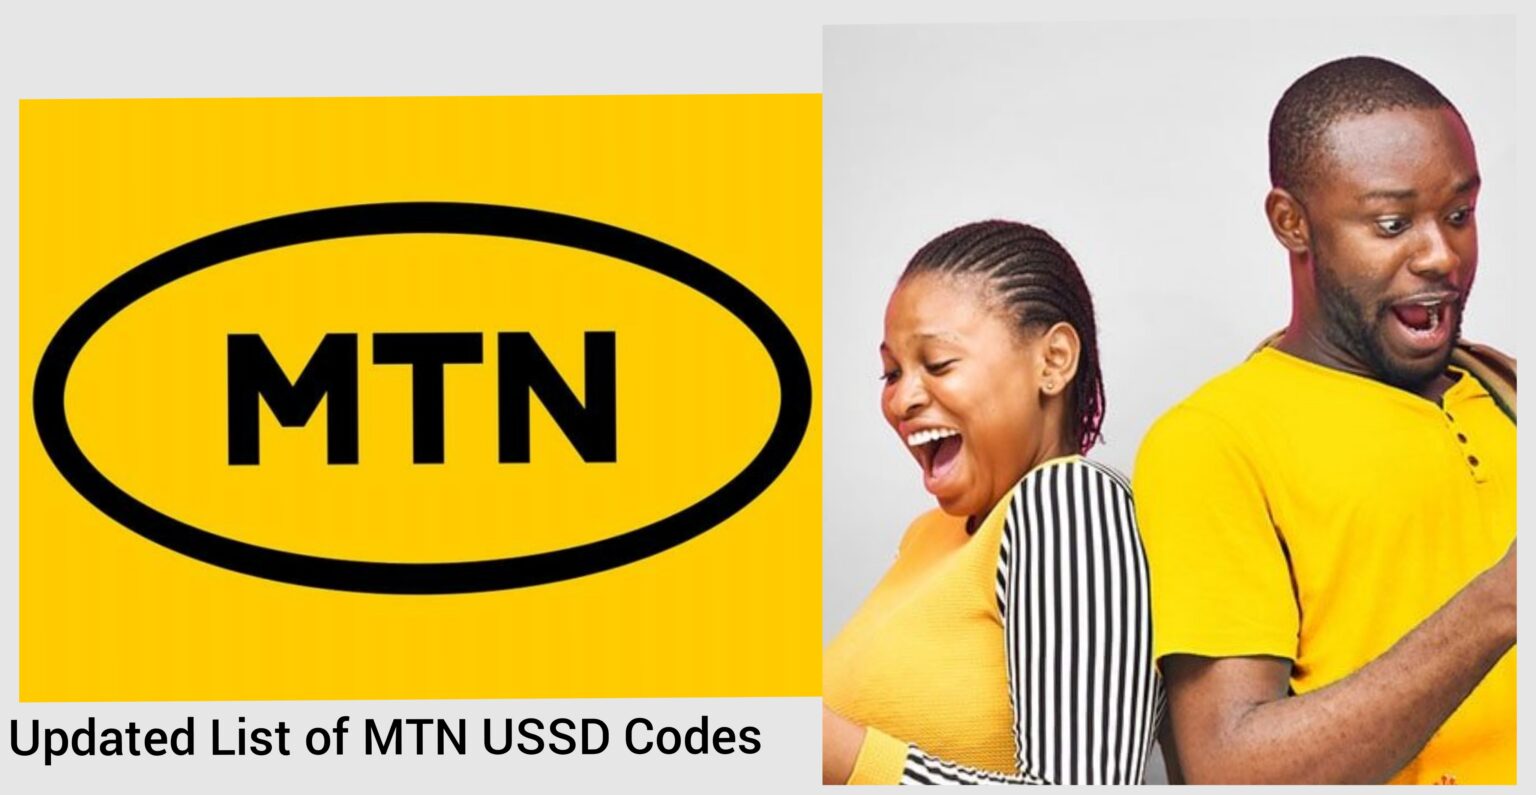 Updated List of MTN USSD Codes